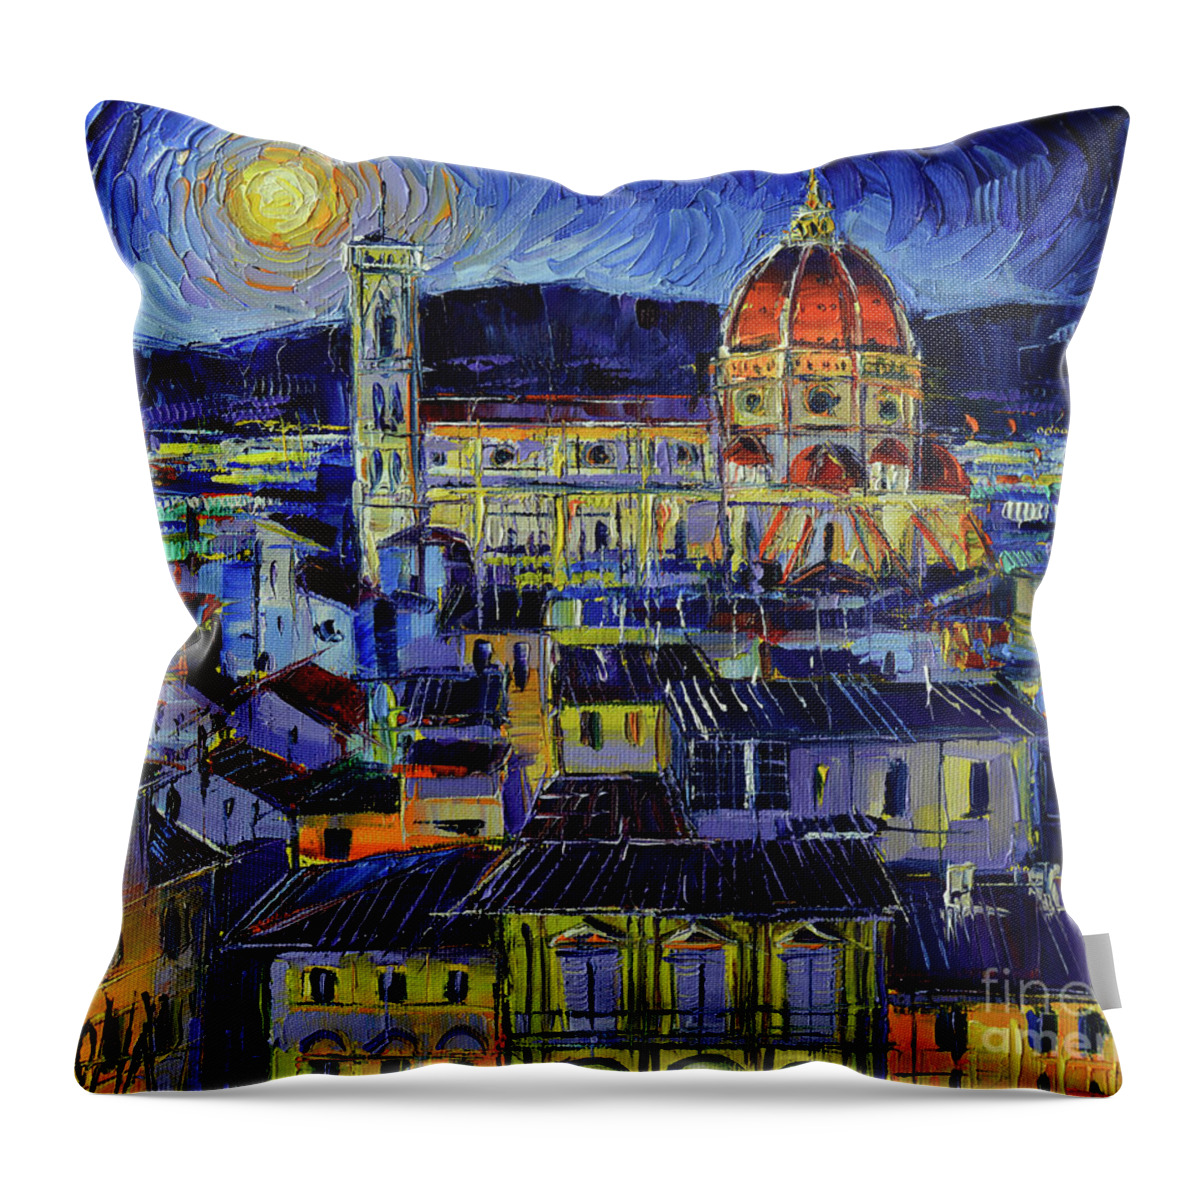 Florence Throw Pillow featuring the painting Florence Rooftops And Duomo Night View by Mona Edulesco